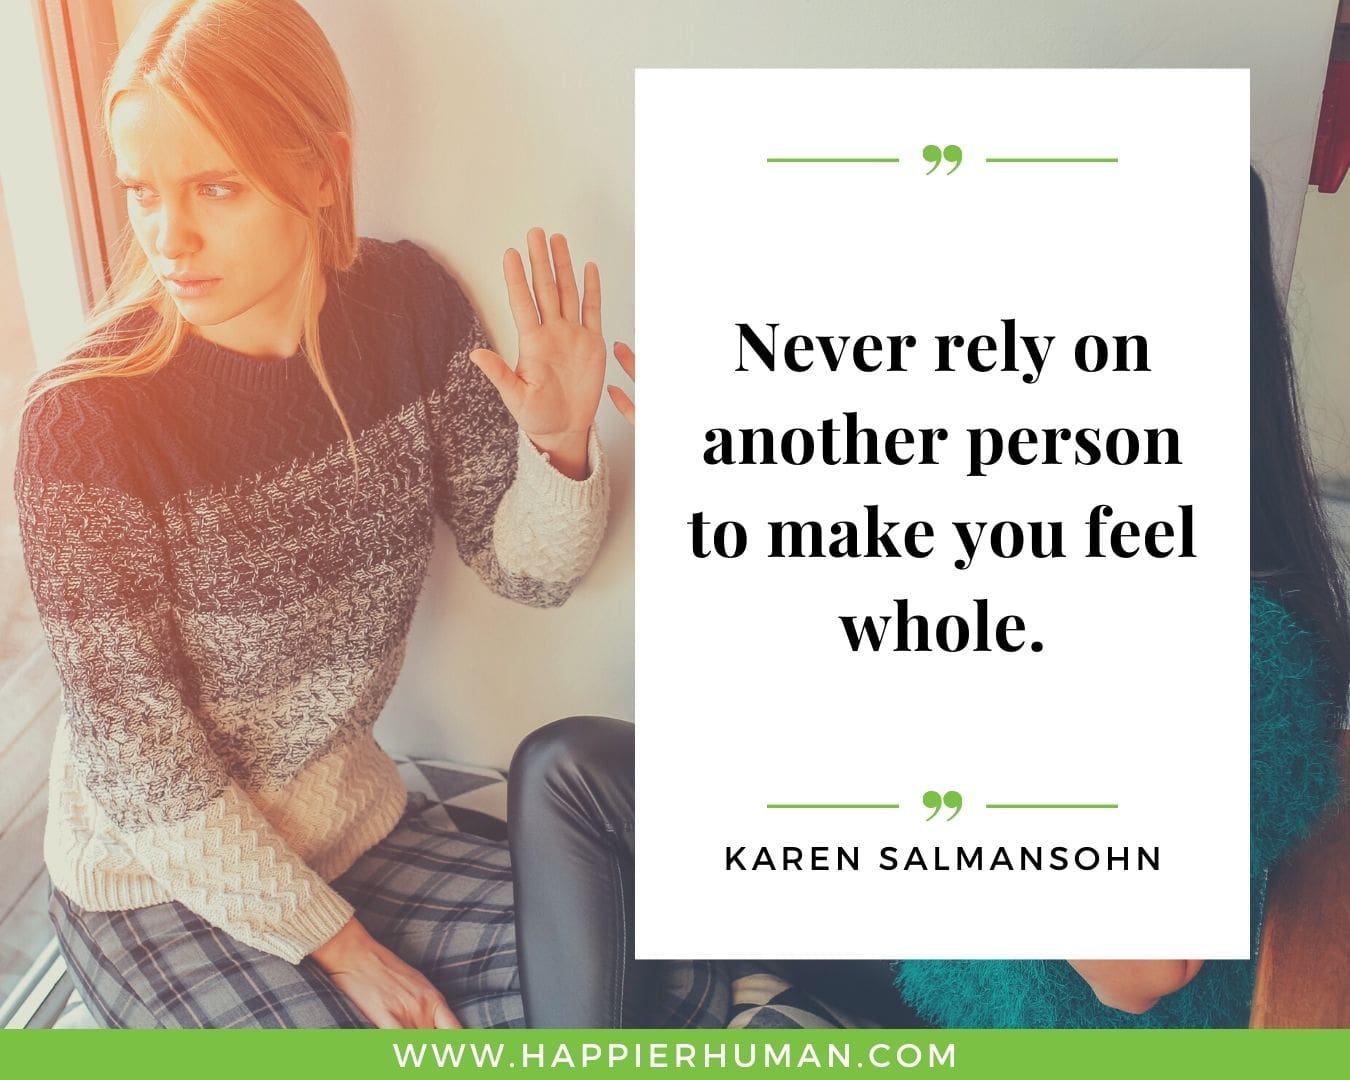 Toxic People Quotes - “Never rely on another person to make you feel whole.” – Karen Salmansohn